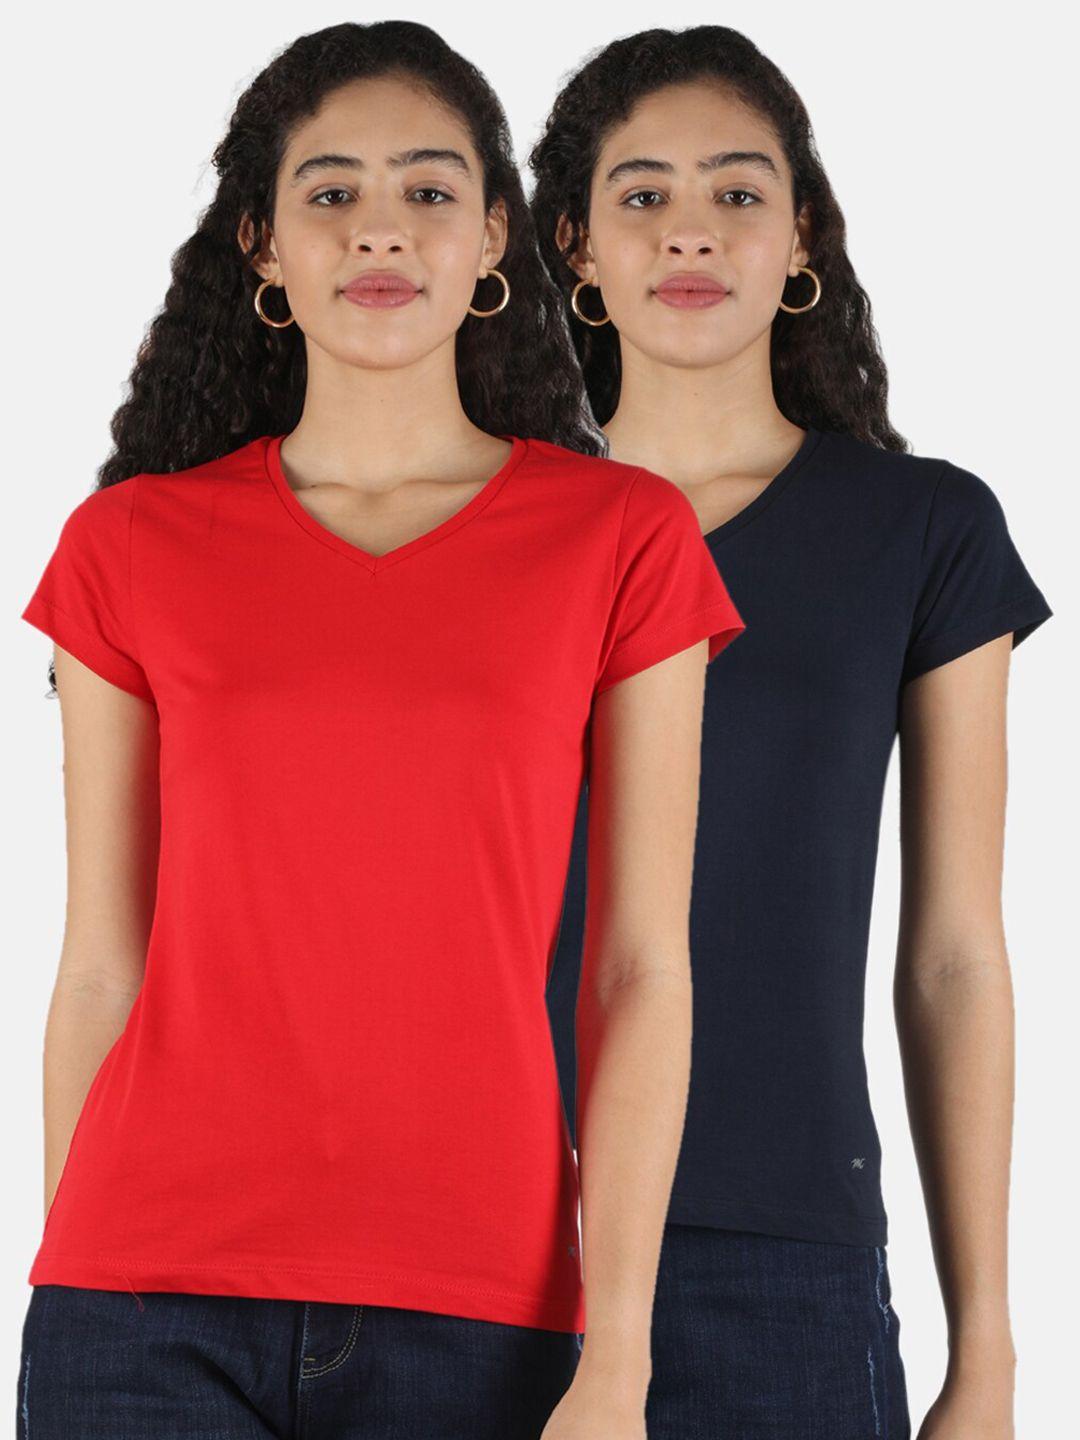 monte carlo women red & navy blue set of 2 v-neck pure cotton t-shirt